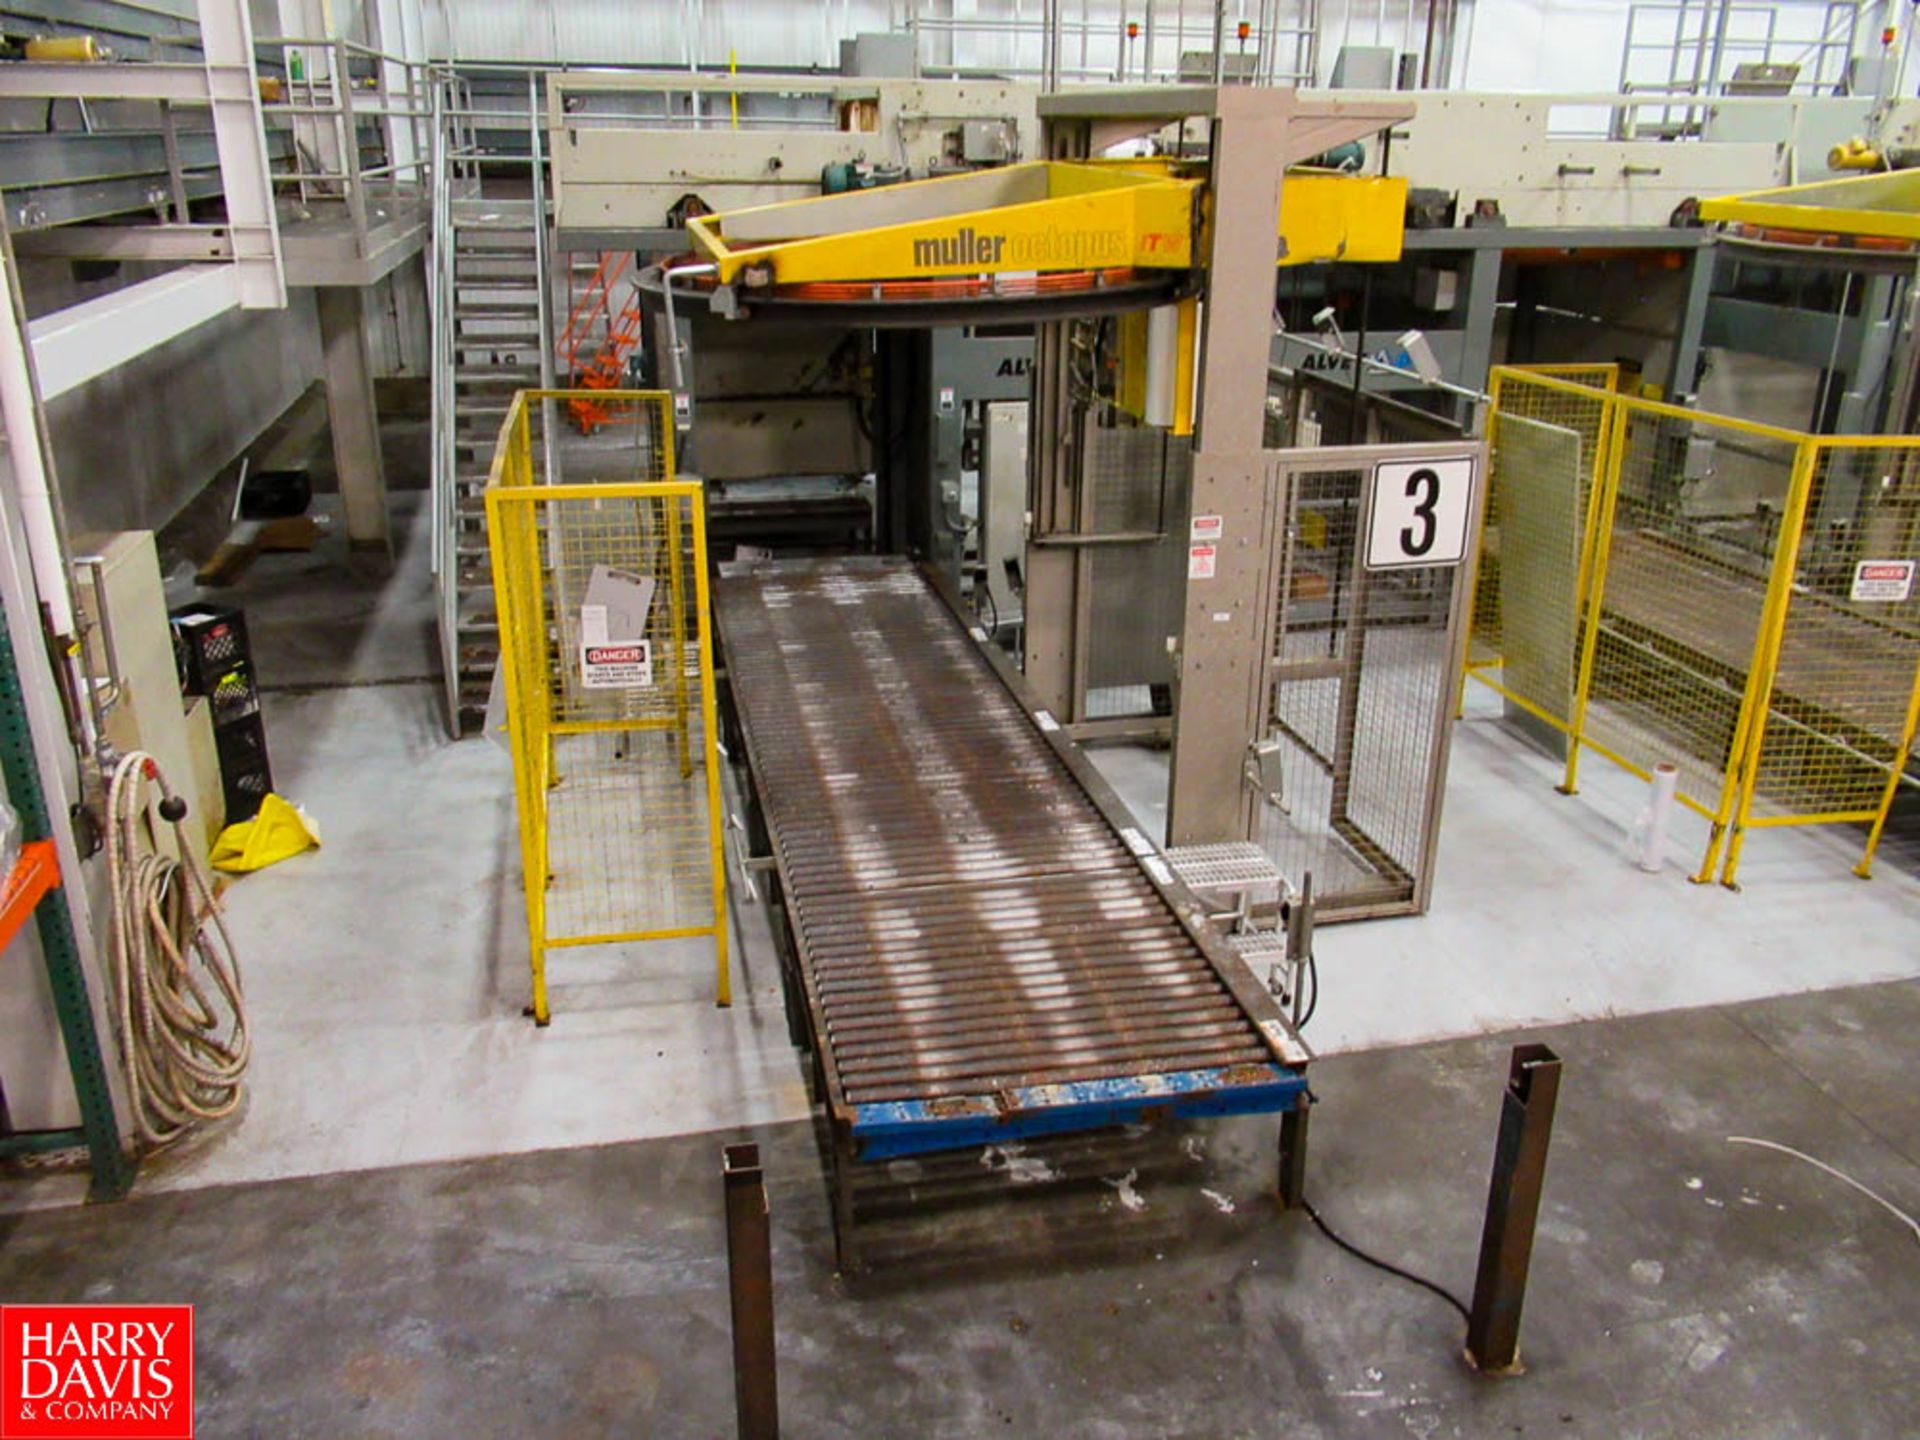 Alvey Full Case High Level Palletizer, Model: Series 880 ,with Adjustable Pallet Feed Carriage, 40 x